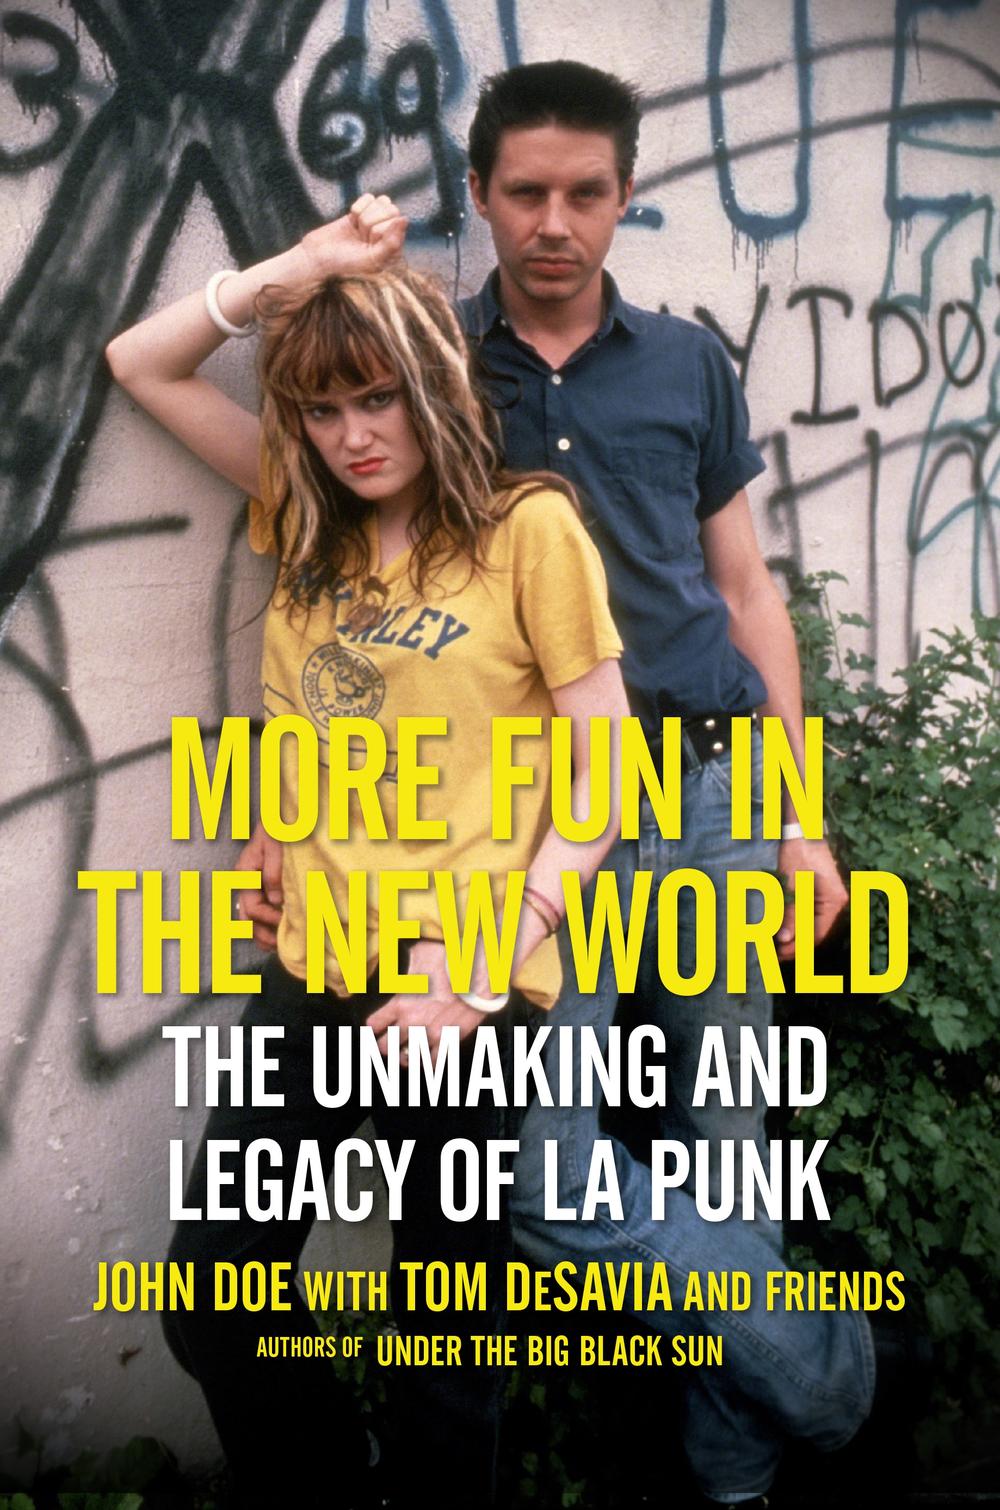 The new book from John Doe and Tom DeSavia, called "More Fun In The New World," chronicles how the LA punk scene evolved from 1982 to 1988, told through essays by those who experienced it.